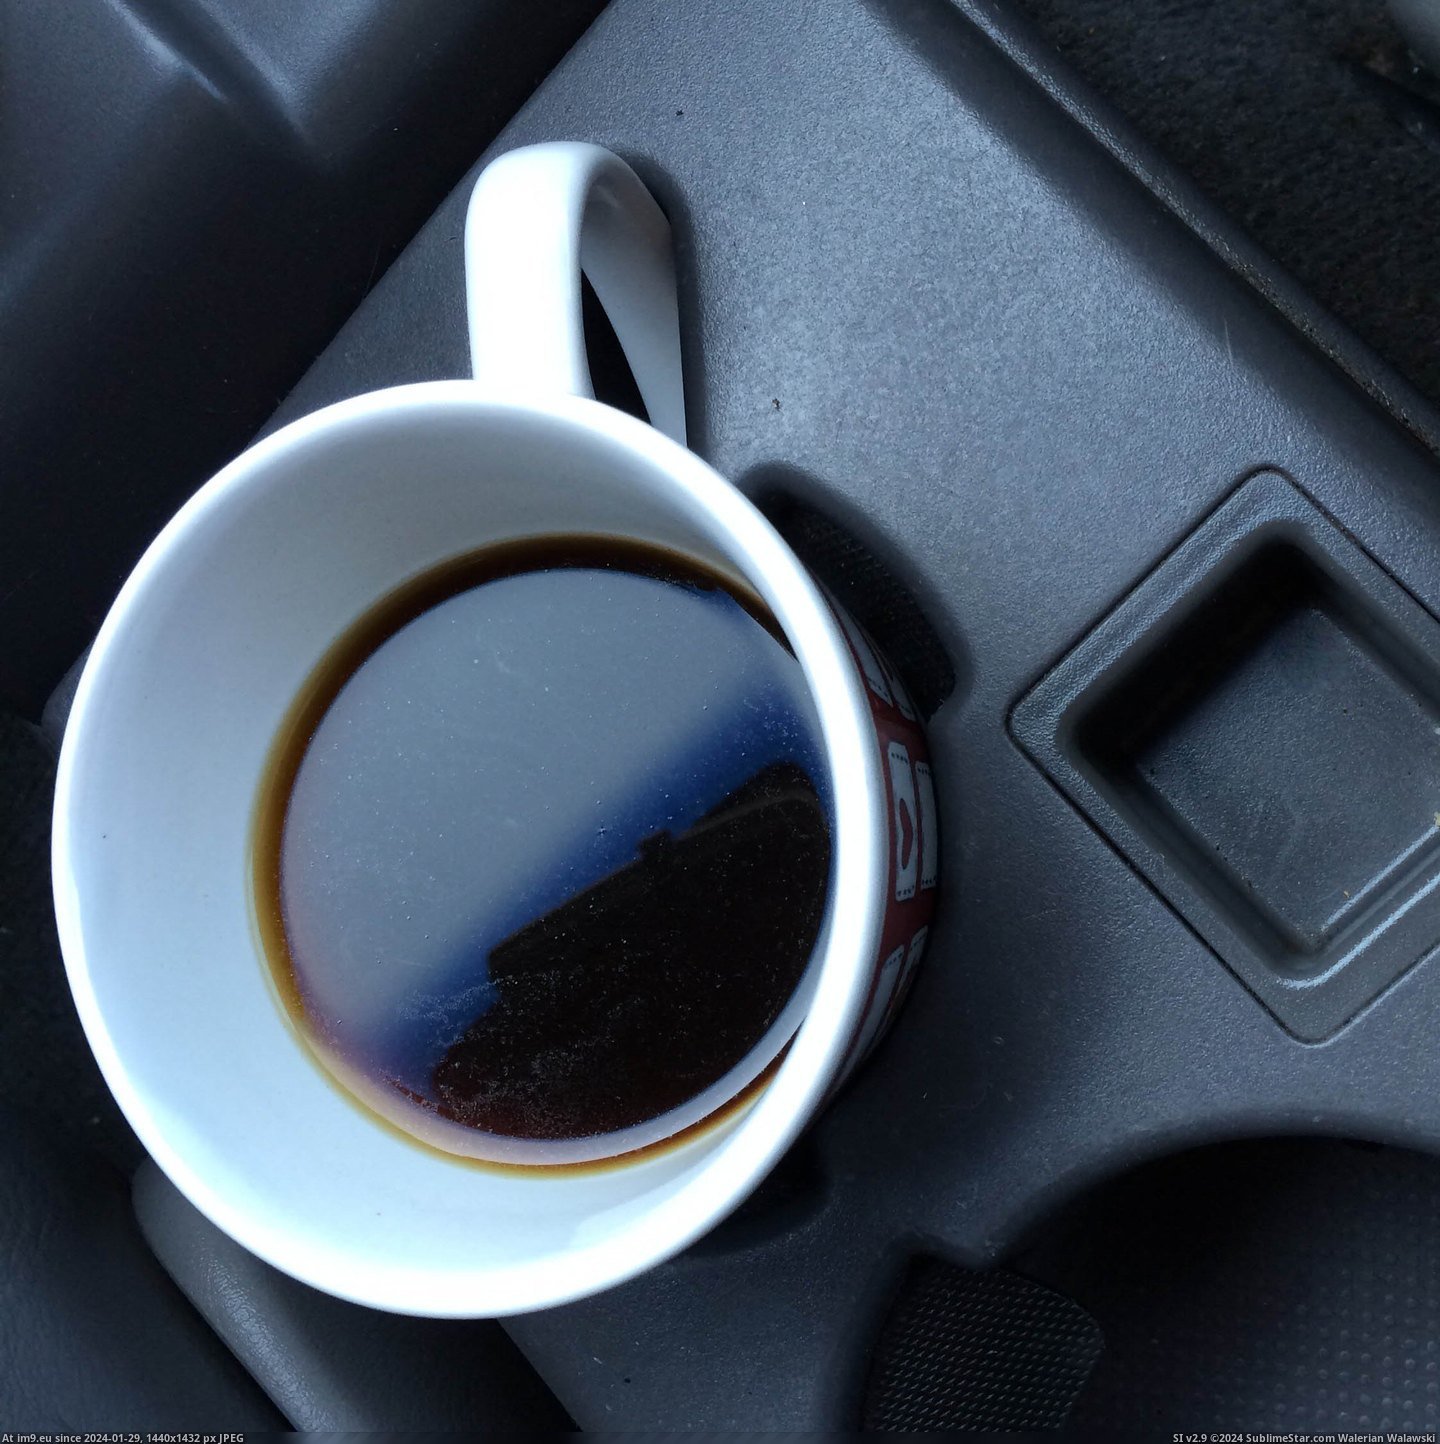 #Cup #Truck #Handles #Holders #Designed #Mug [Mildlyinteresting] The cup holders in my truck appear to be designed for mug handles. Pic. (Image of album My r/MILDLYINTERESTING favs))